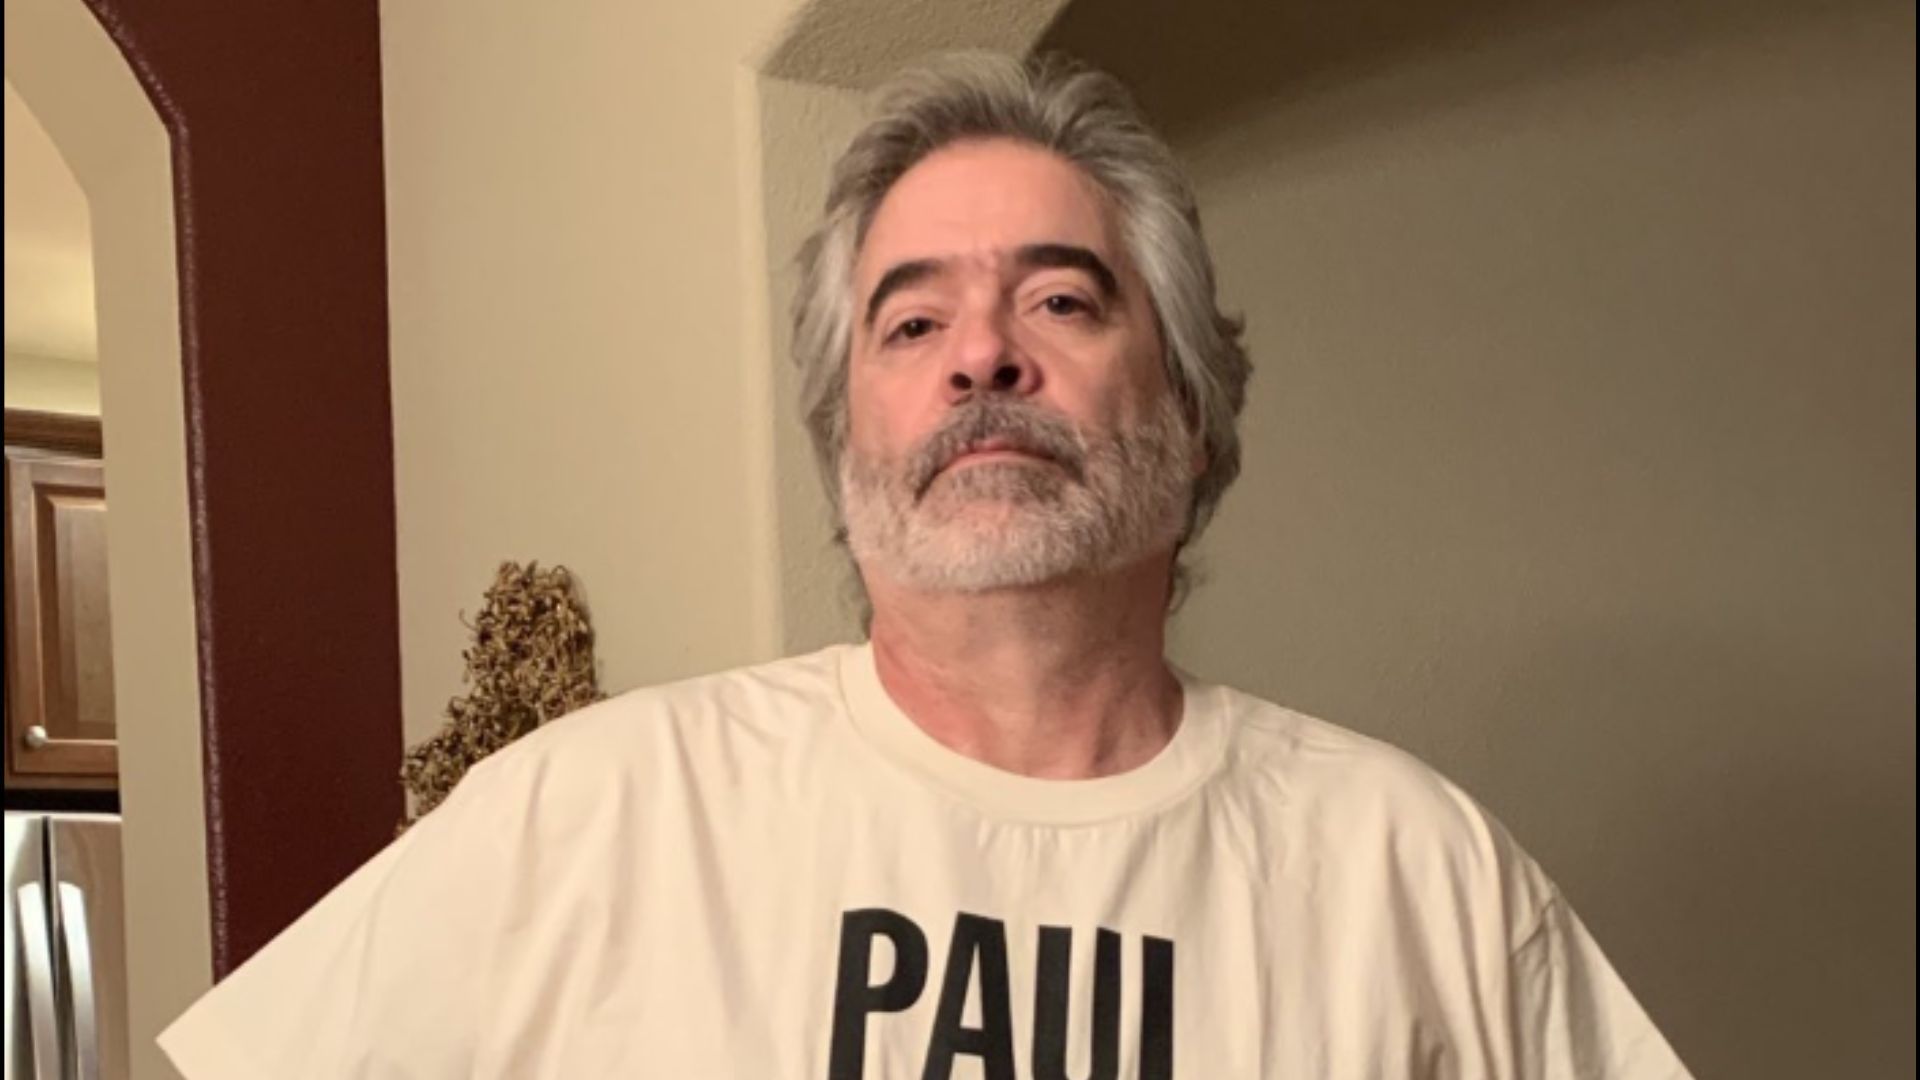 Vince Russo had some interesting things to say this week